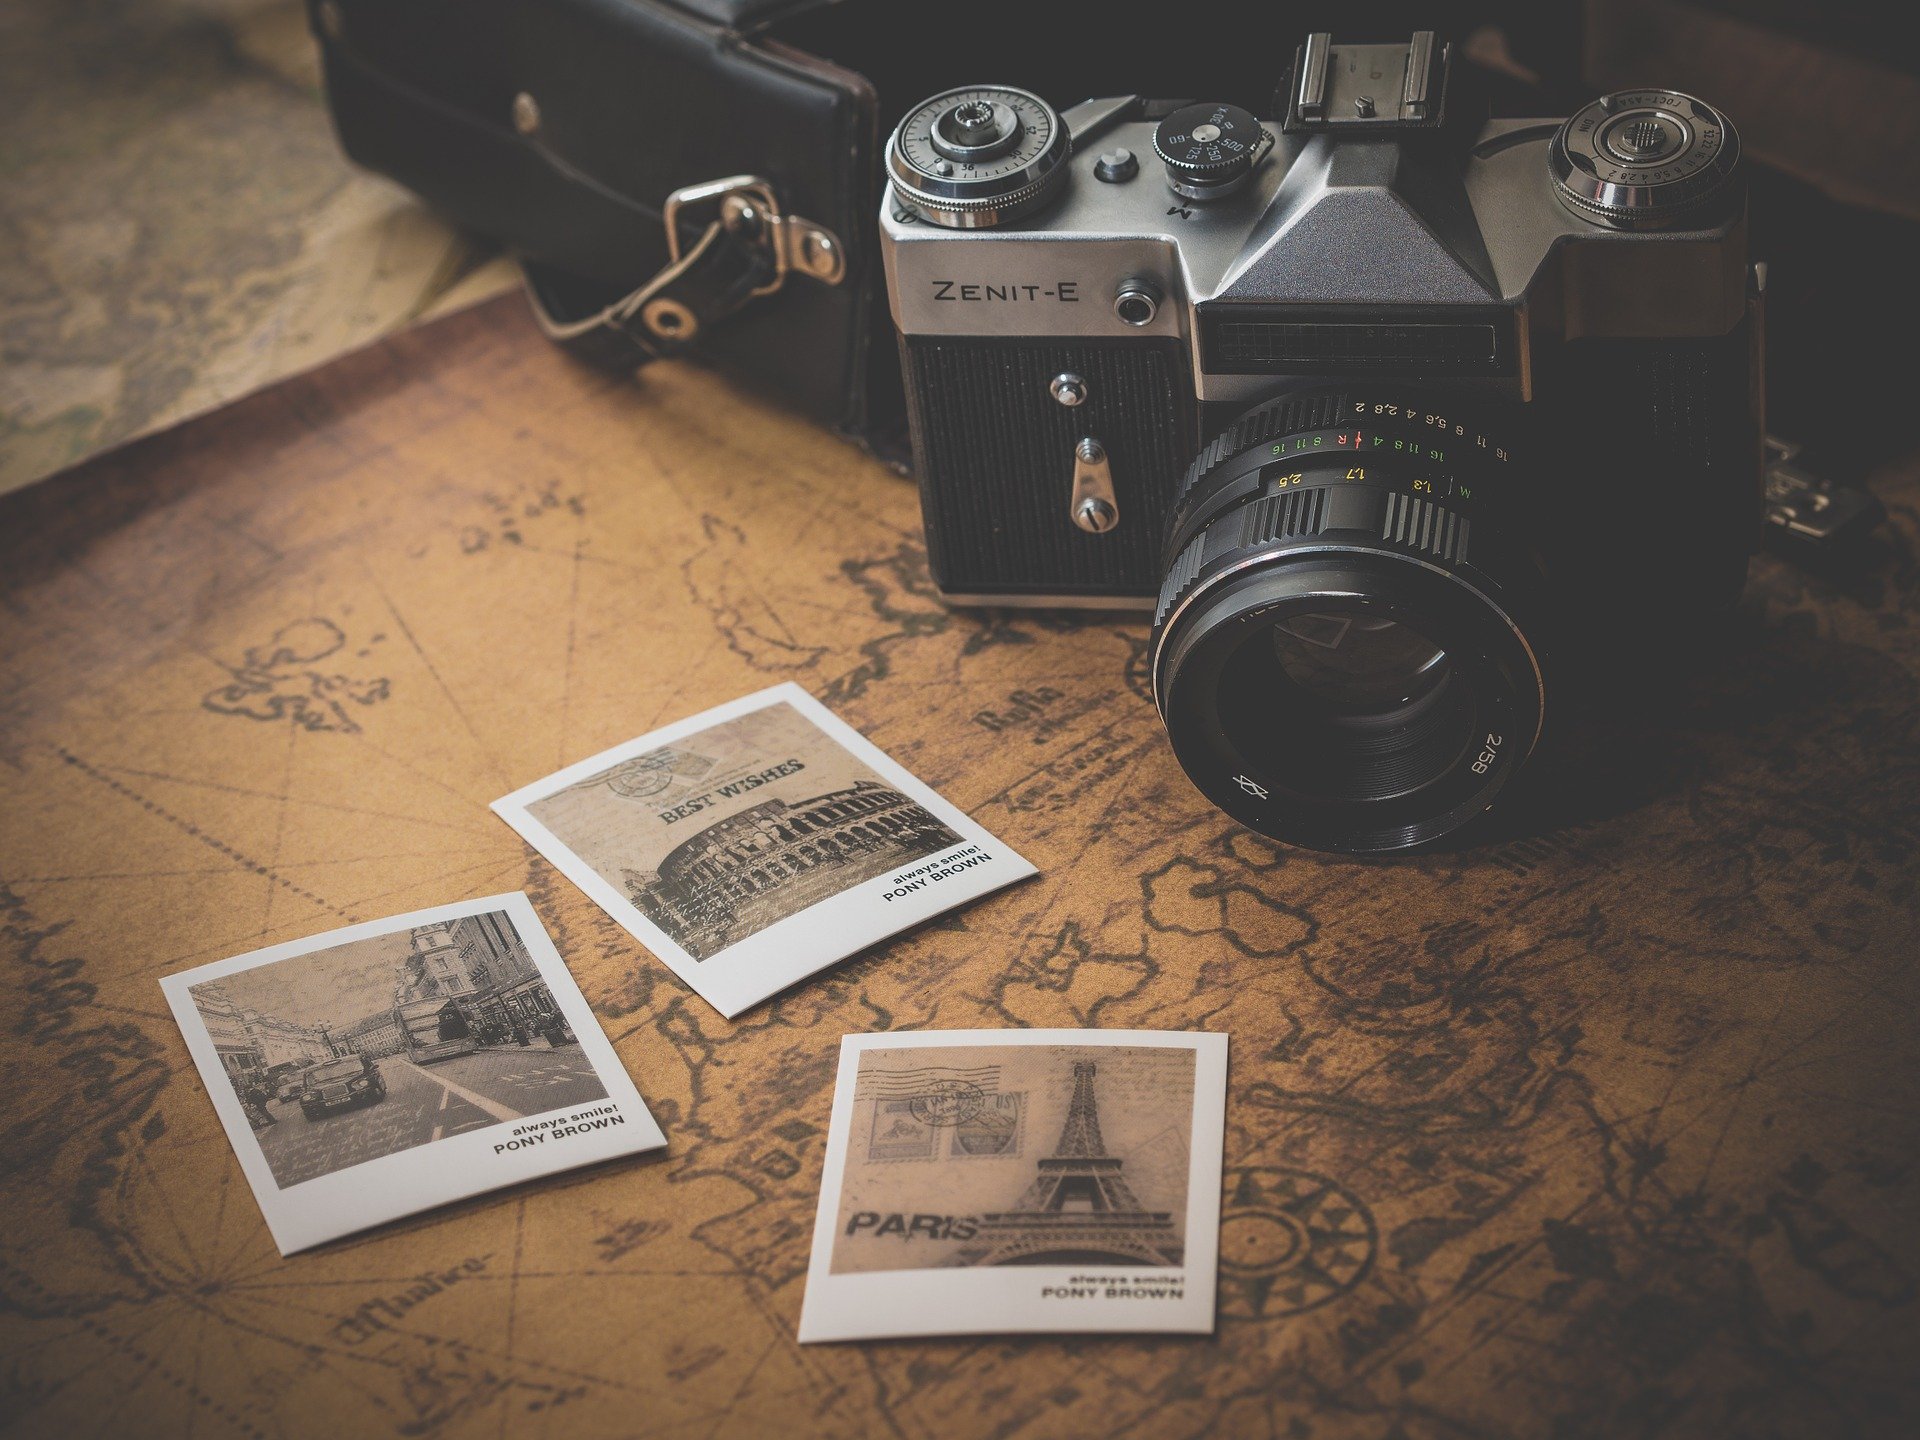 A map and photos on a table demonstrate tips for organizing old photos.